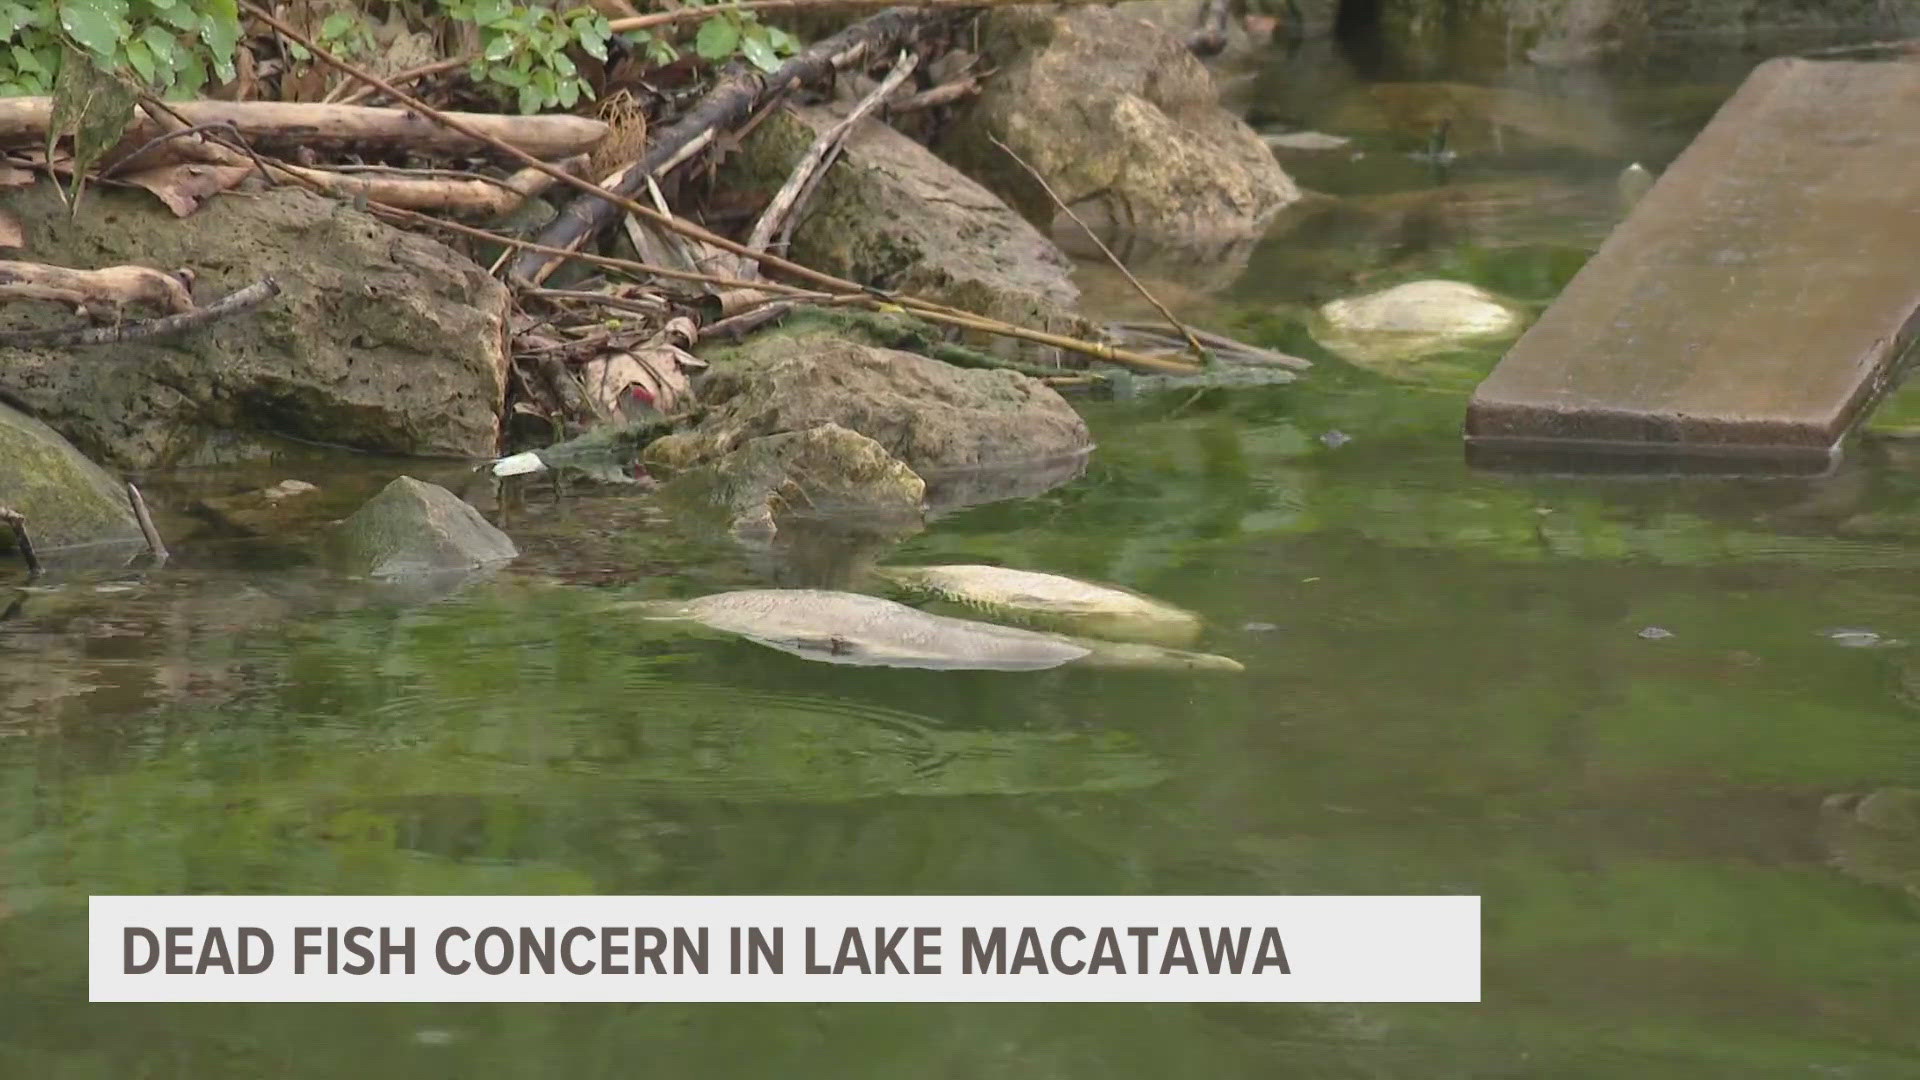 DNR says a large amount of fish die each year around this time and it's no reason for concern.